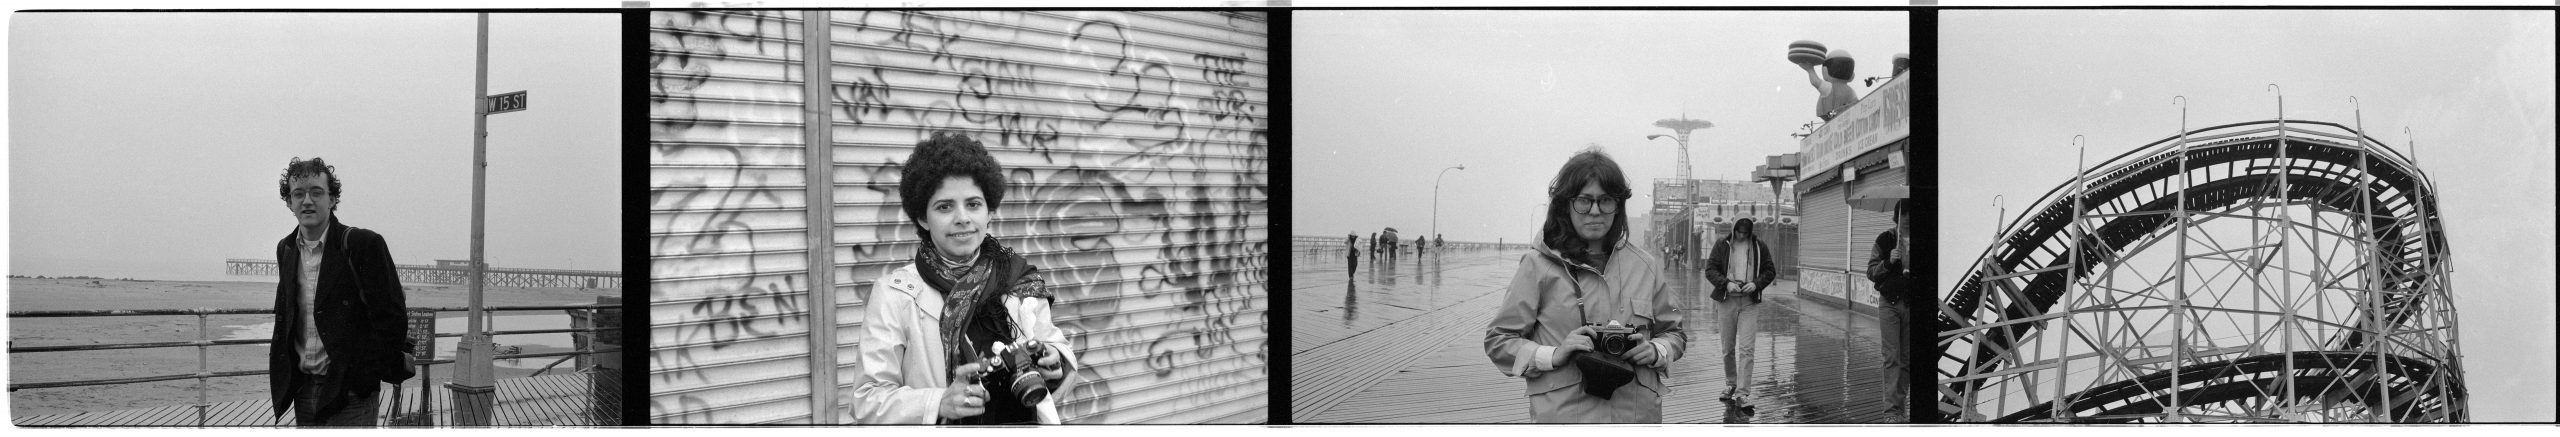 Contact Sheet / Negative Strip, Portrait of Keith Haring at Coney Island, 1978.